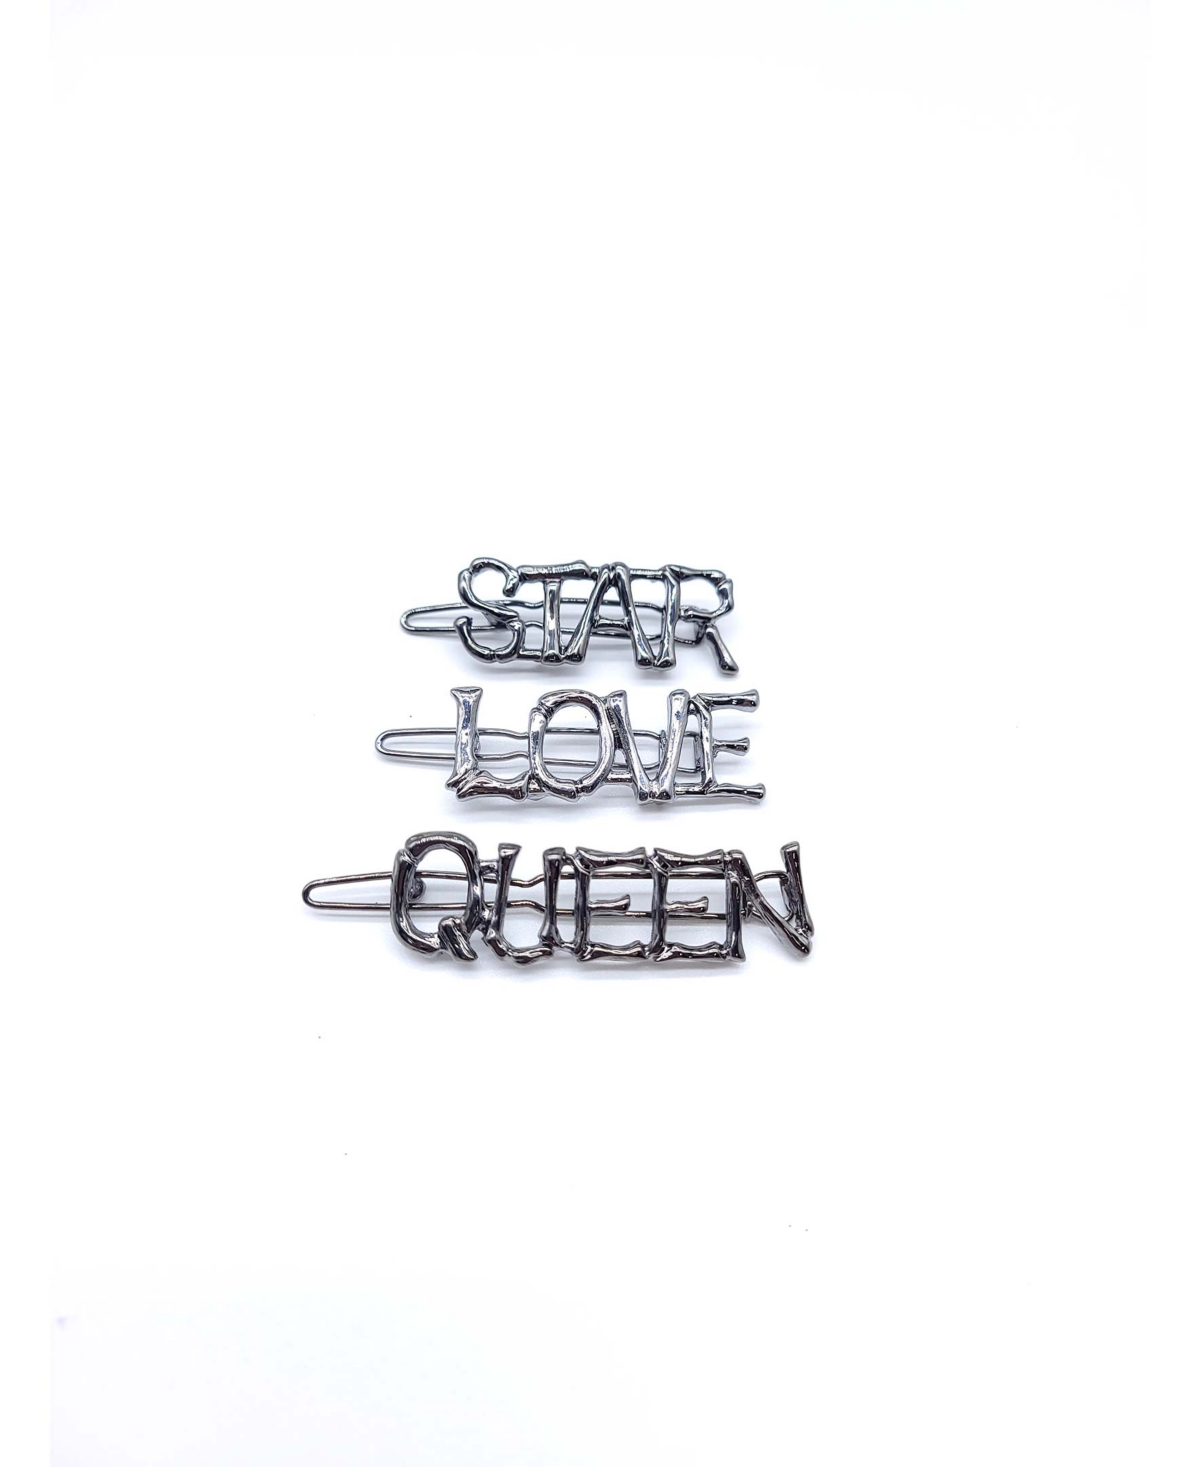 Women's Tree-Branch Words Barrettes Set, Pack of 3 - Silver